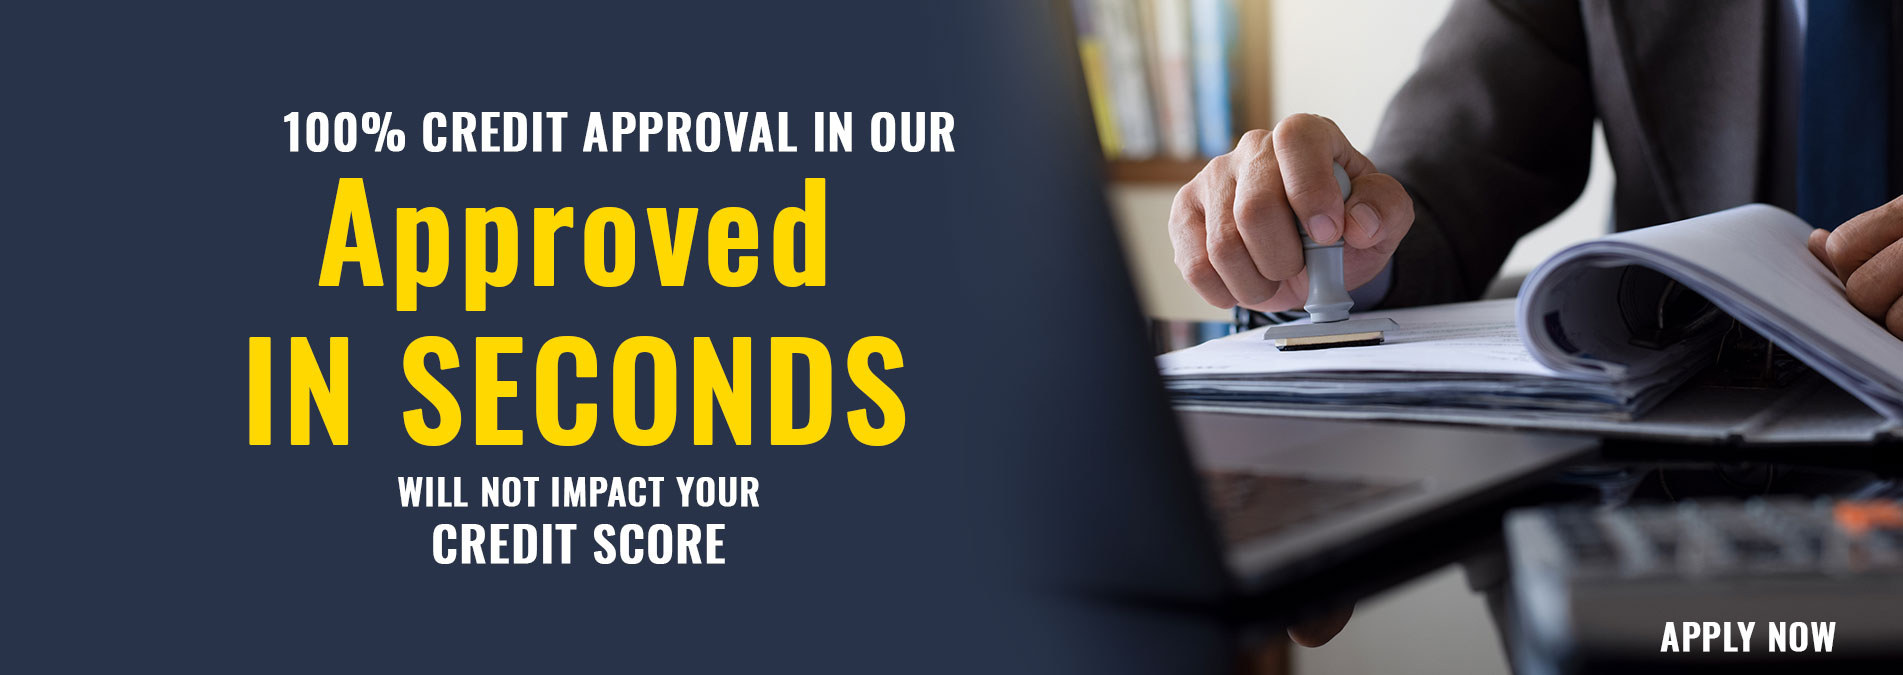 Get approved in seconds